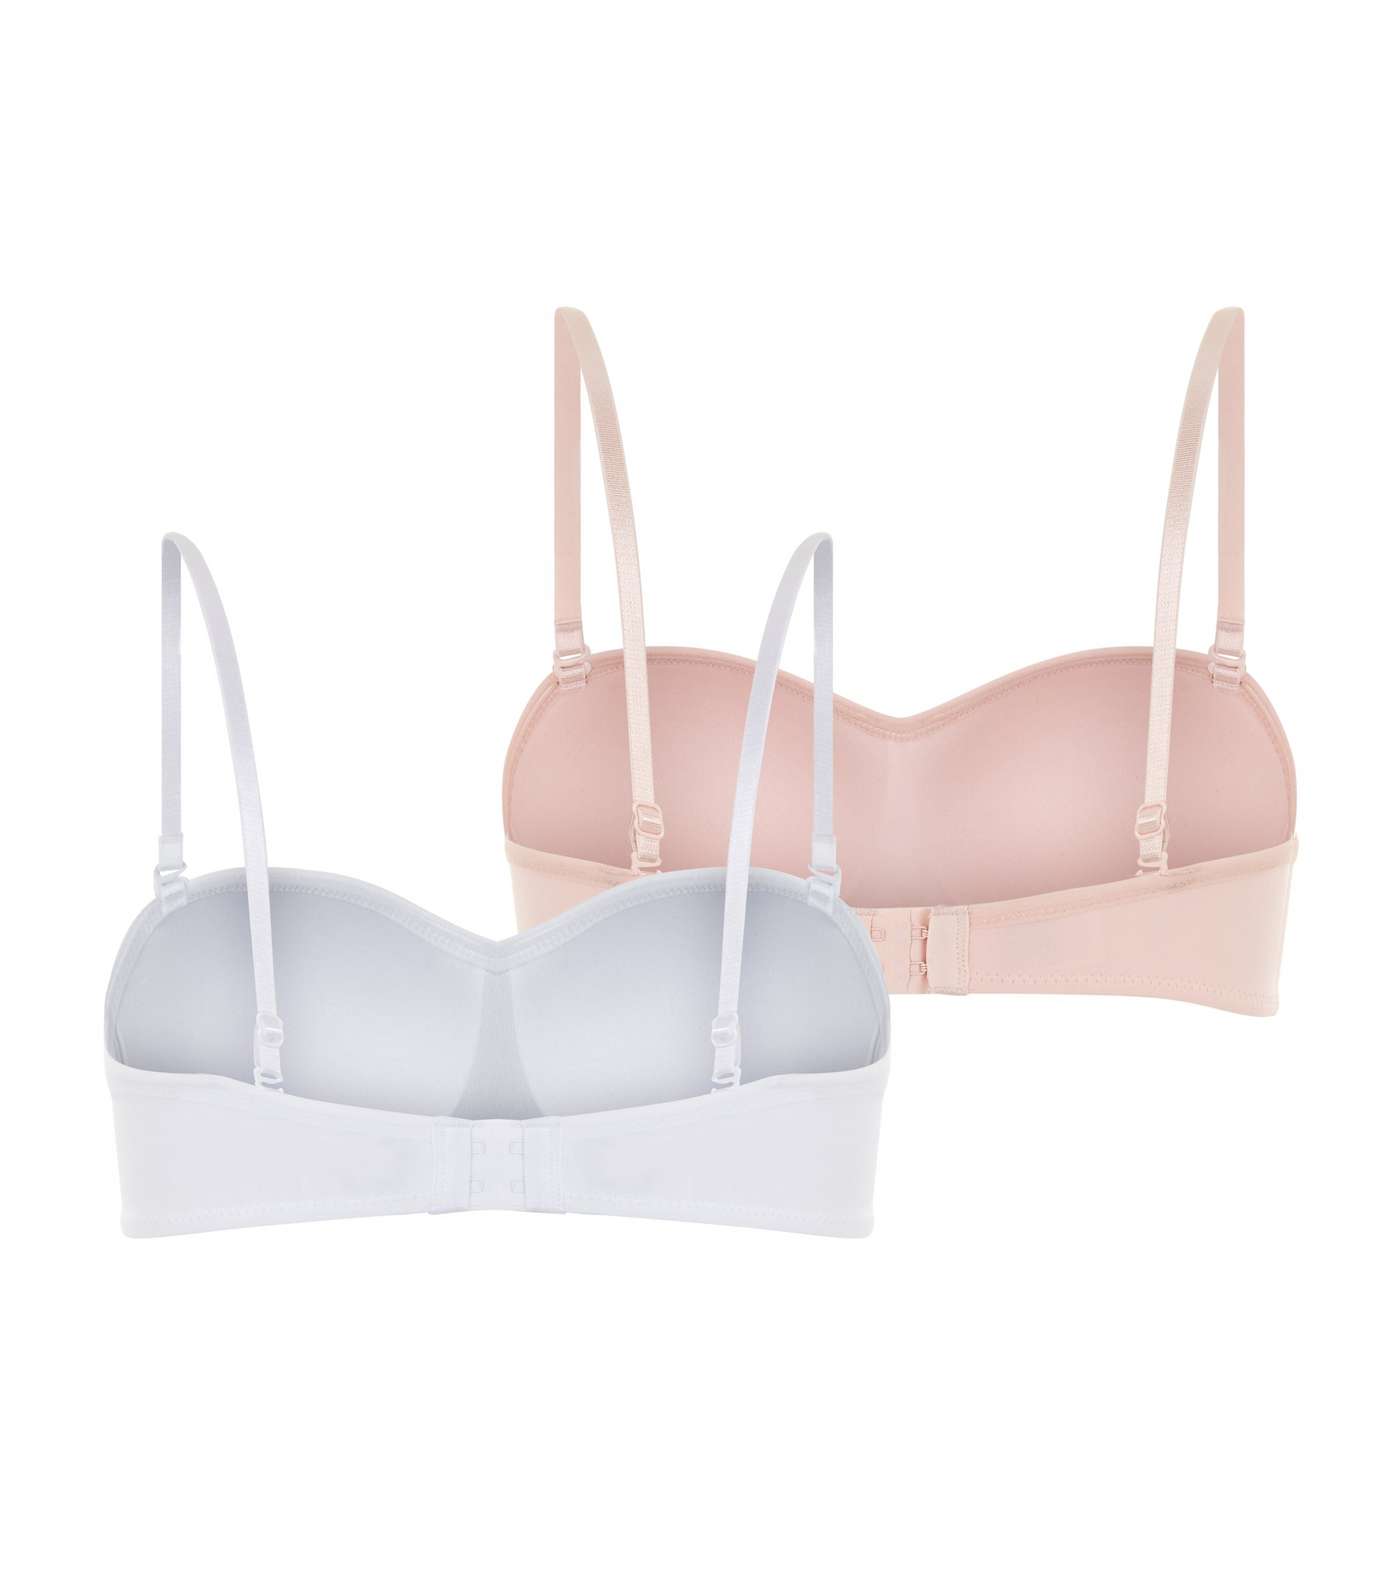 Girls 2 Pack White and Pink Bandeaus Image 2